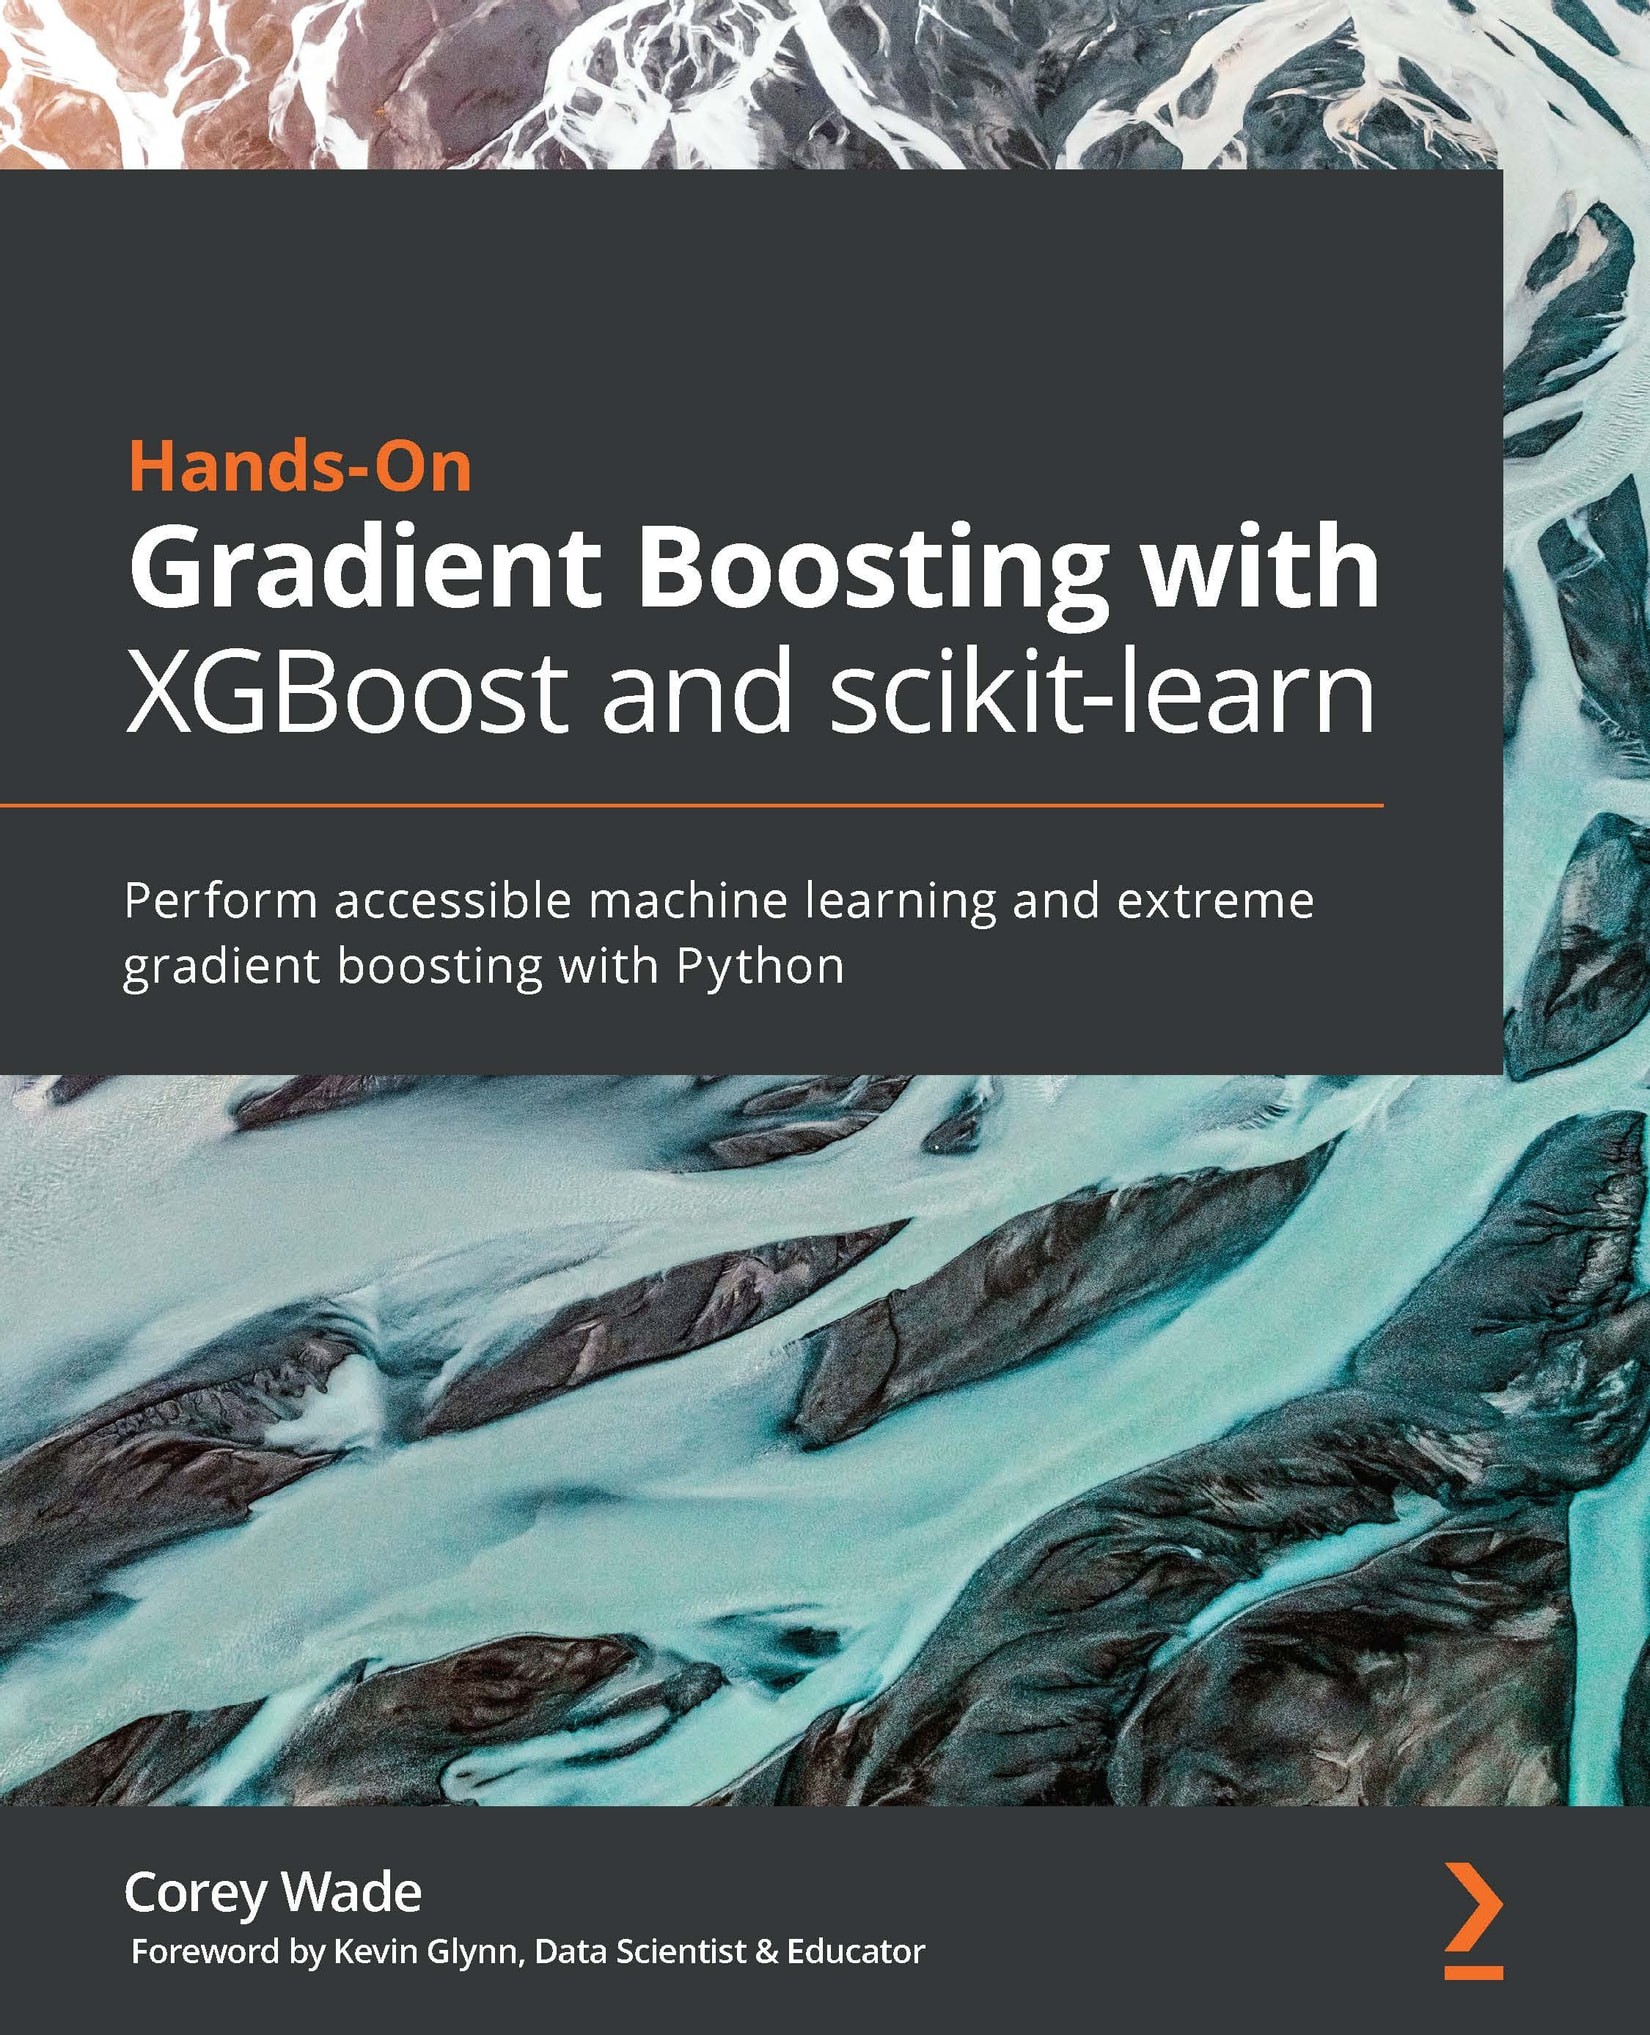 Hands-On Gradient Boosting With XGBoost and Scikit-Learn: Perform Accessible Machine Learning and Extreme Gradient Boosting With Python